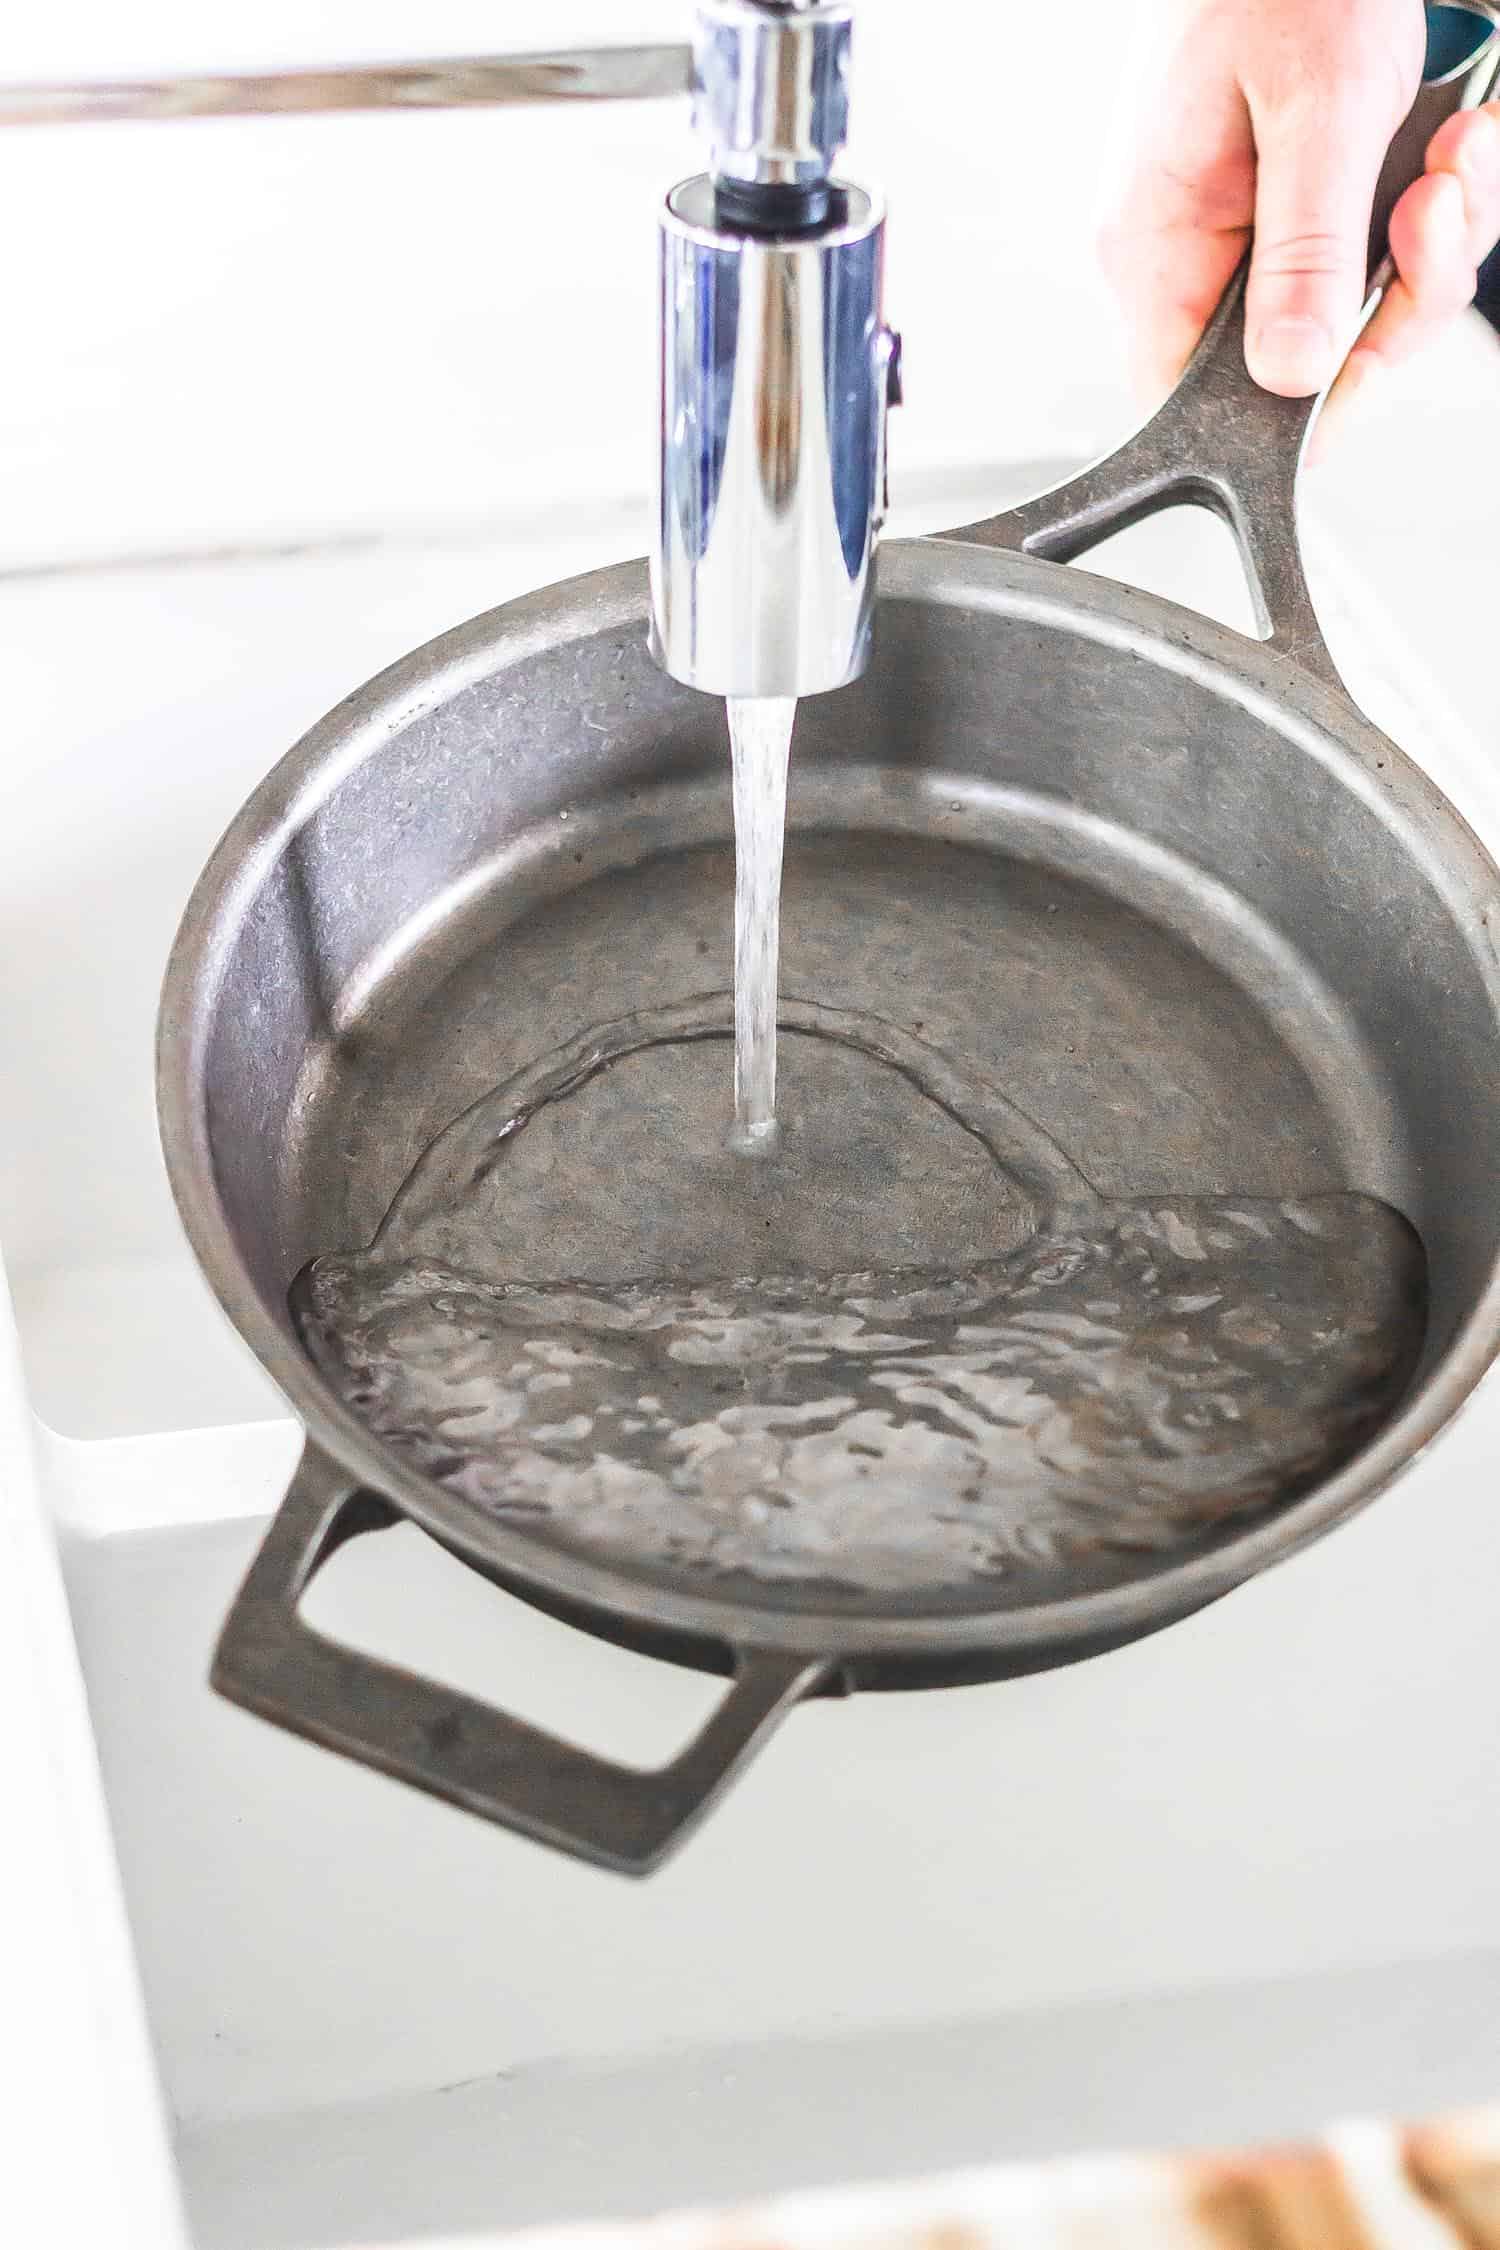 cast iron skillet being held under a kitchen faucet with water pouring into it